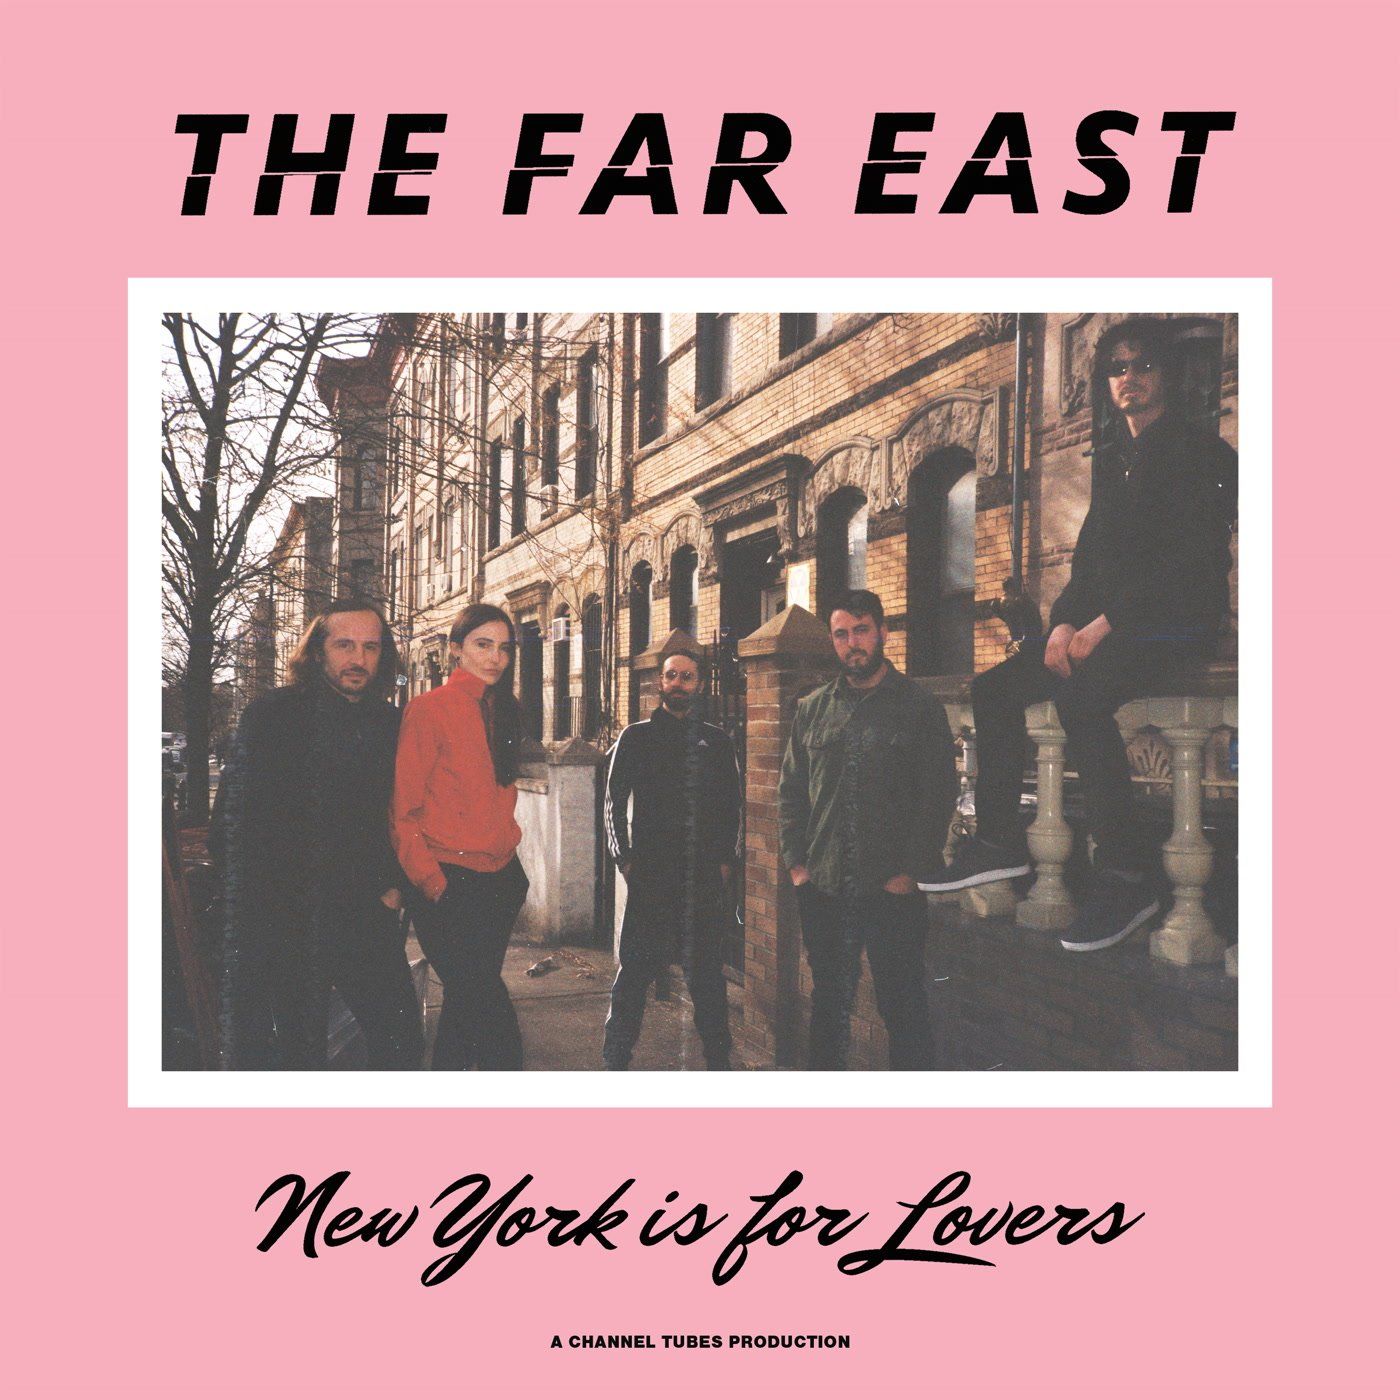 THE FAR EAST - New York is for lovers (2020)